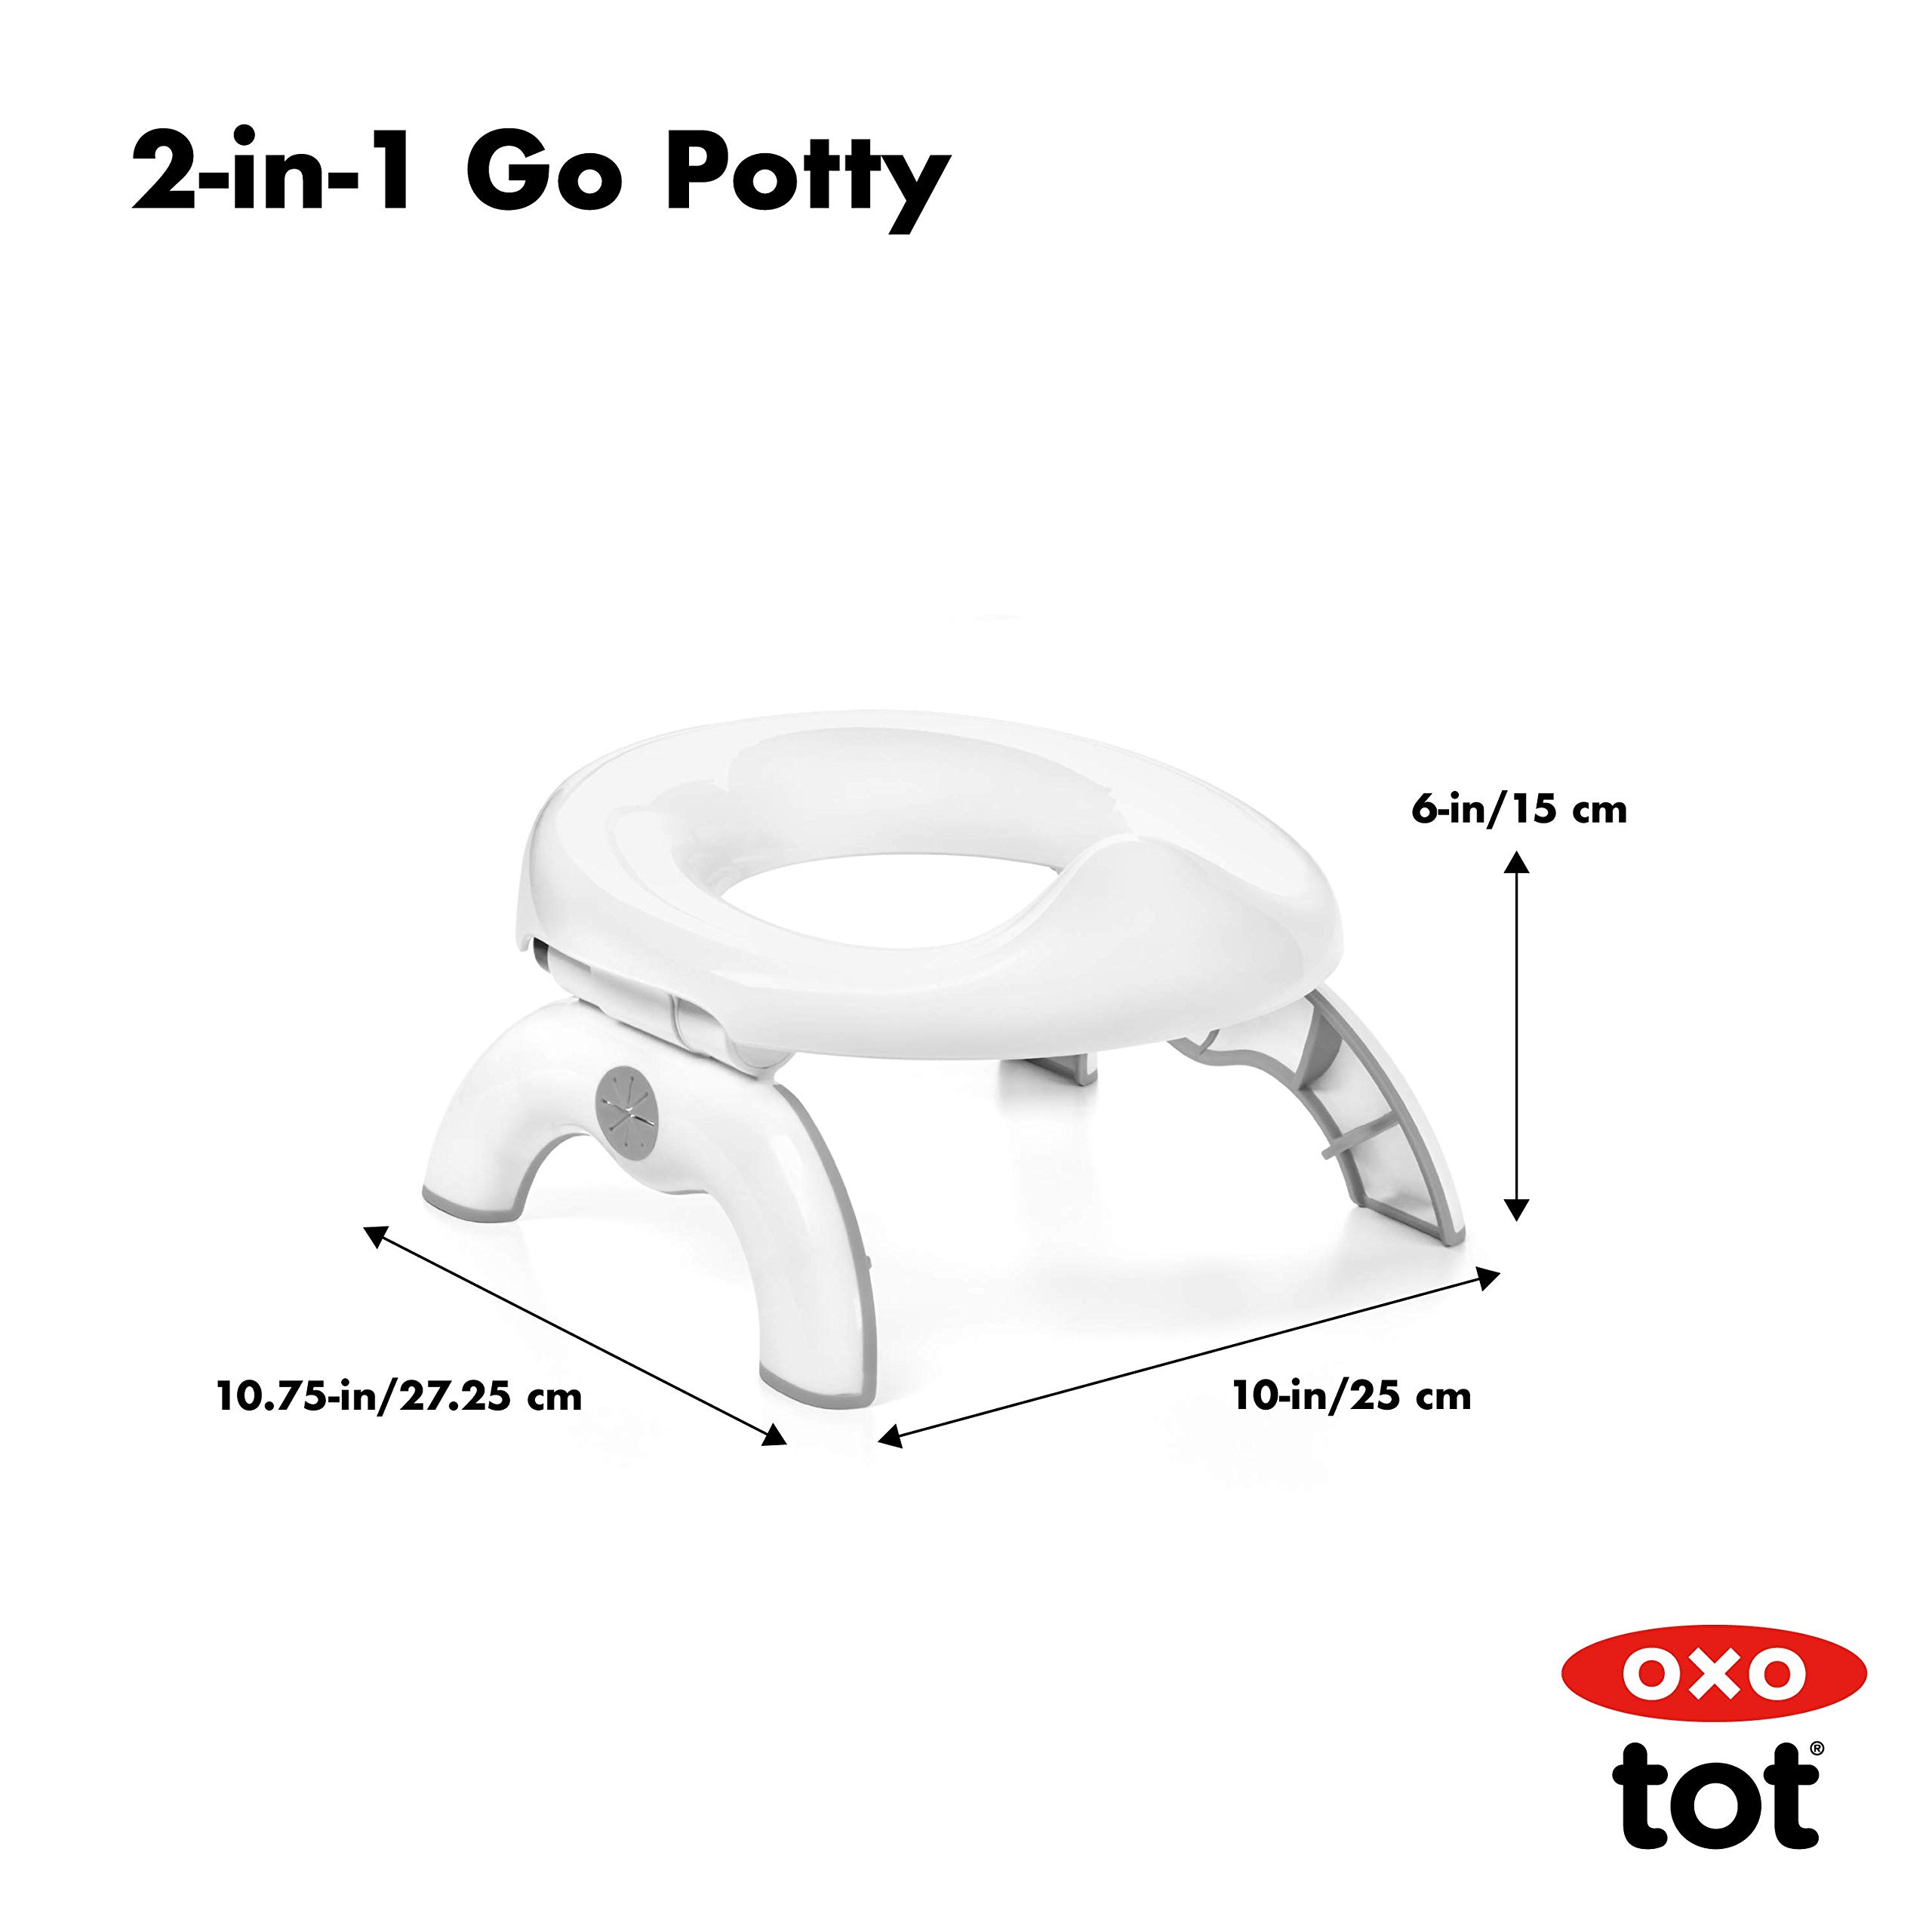 OXO Tot 2-in-1 Go Potty - Gray, 1 Count (Pack of 1)